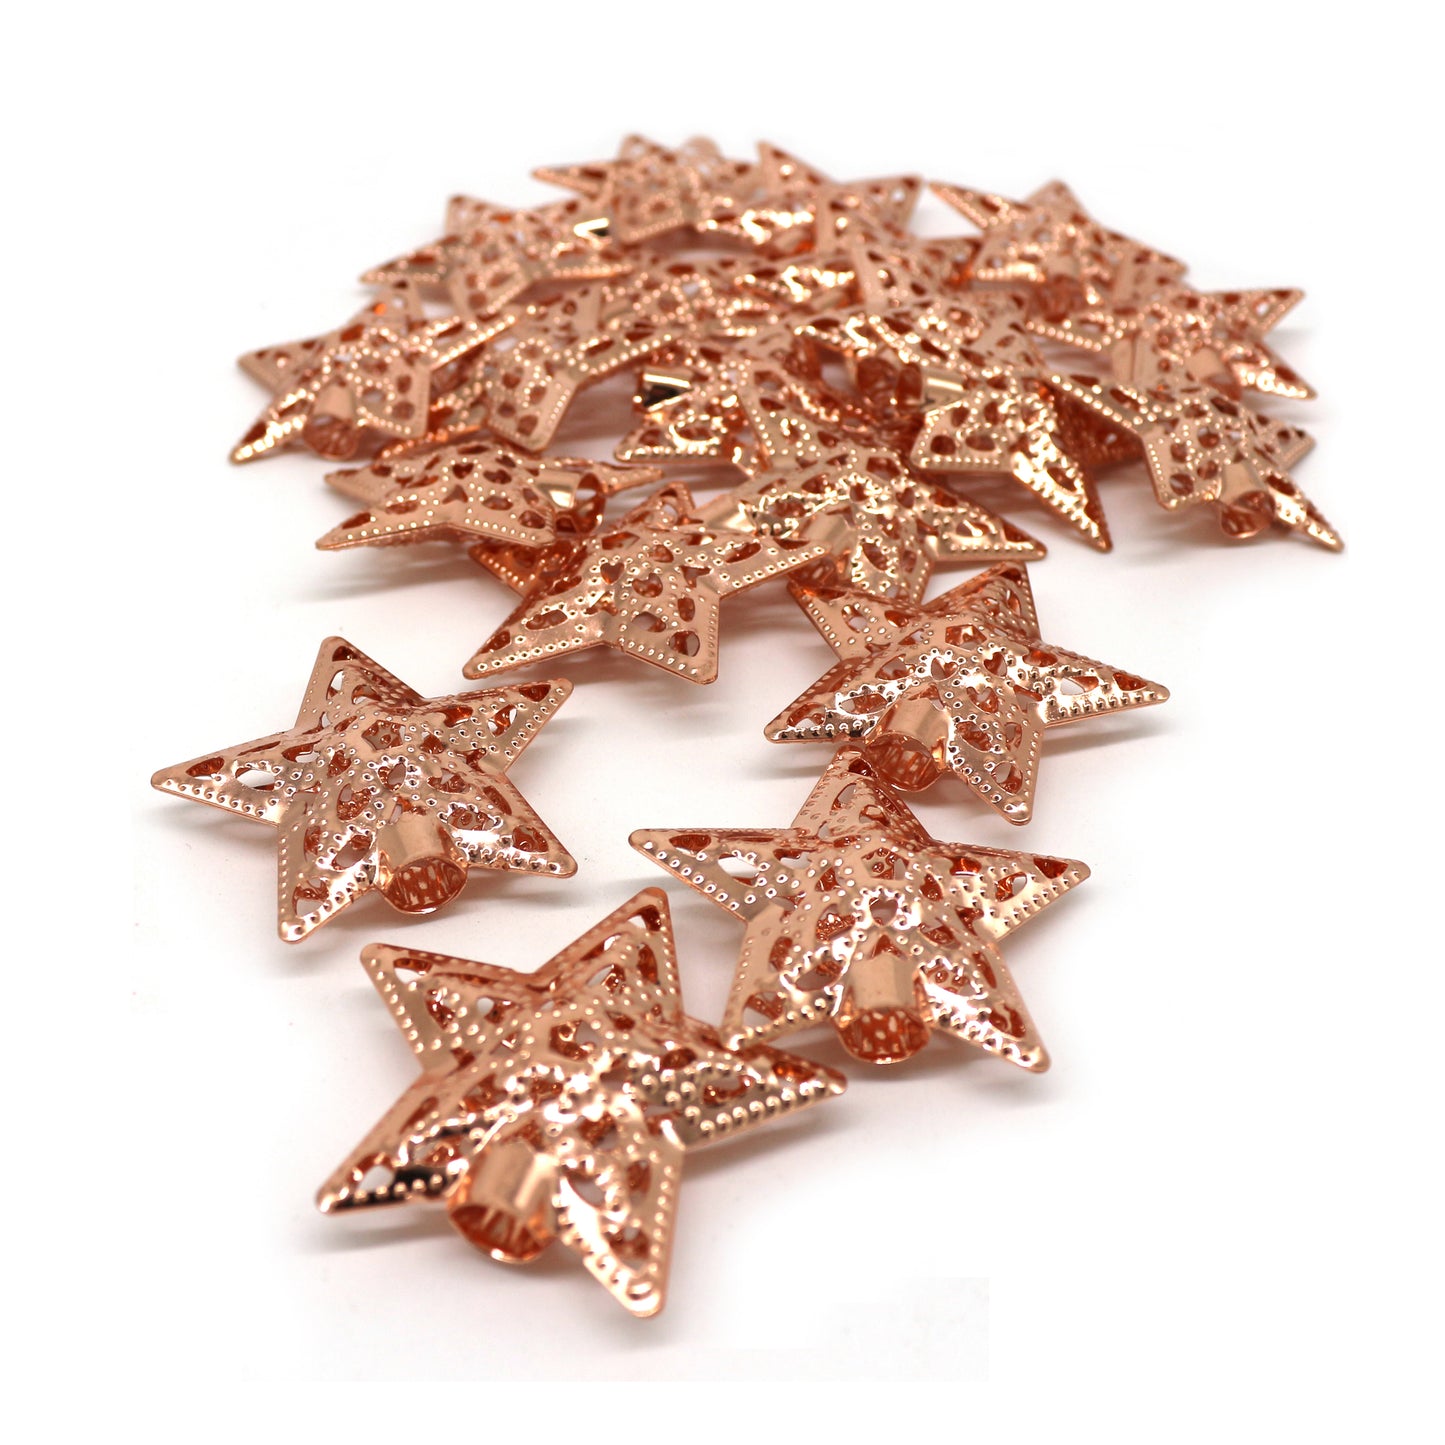 CVHOMEDECO. Rose Gold Metal 3D Star Design Decorations Hanging Decorative Barn Stars Accessories for Home Bedroom Wedding Party Birthday Valentine's Day and Holiday Seasonal Décor, Set of 50.